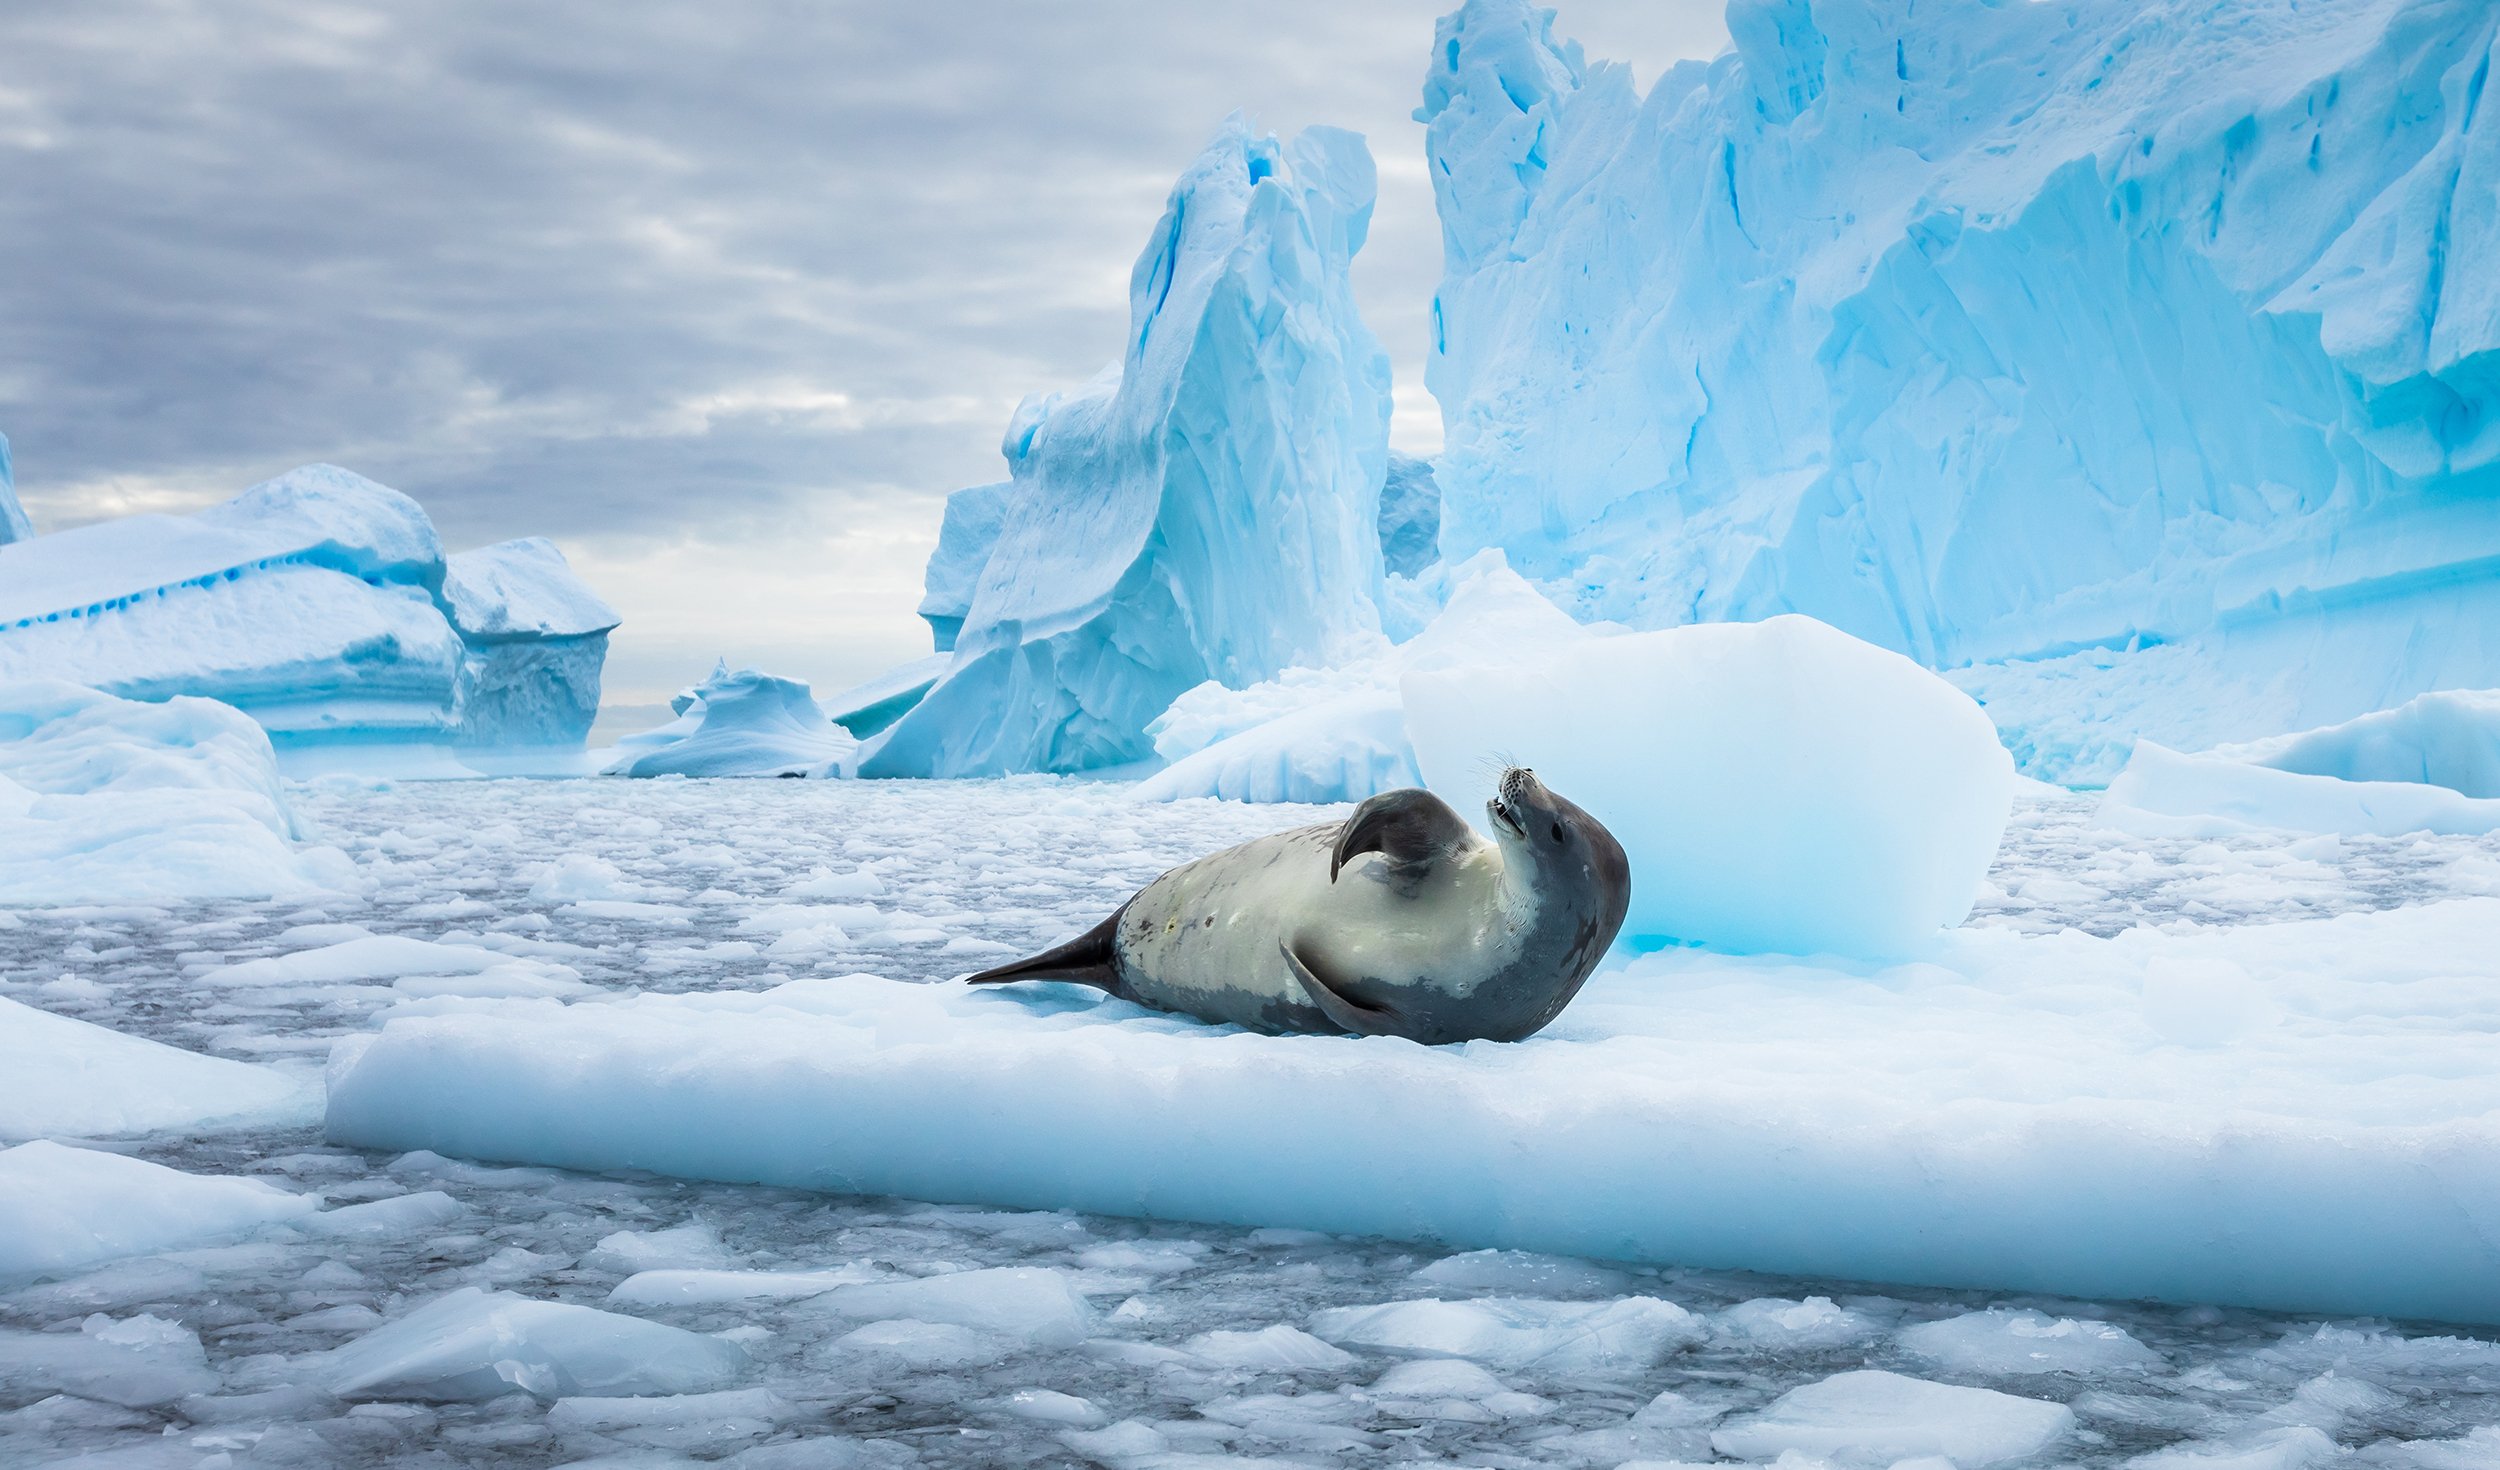 COVID has reached Antarctica and scientists are concerned for its wildlife  - Australian Geographic